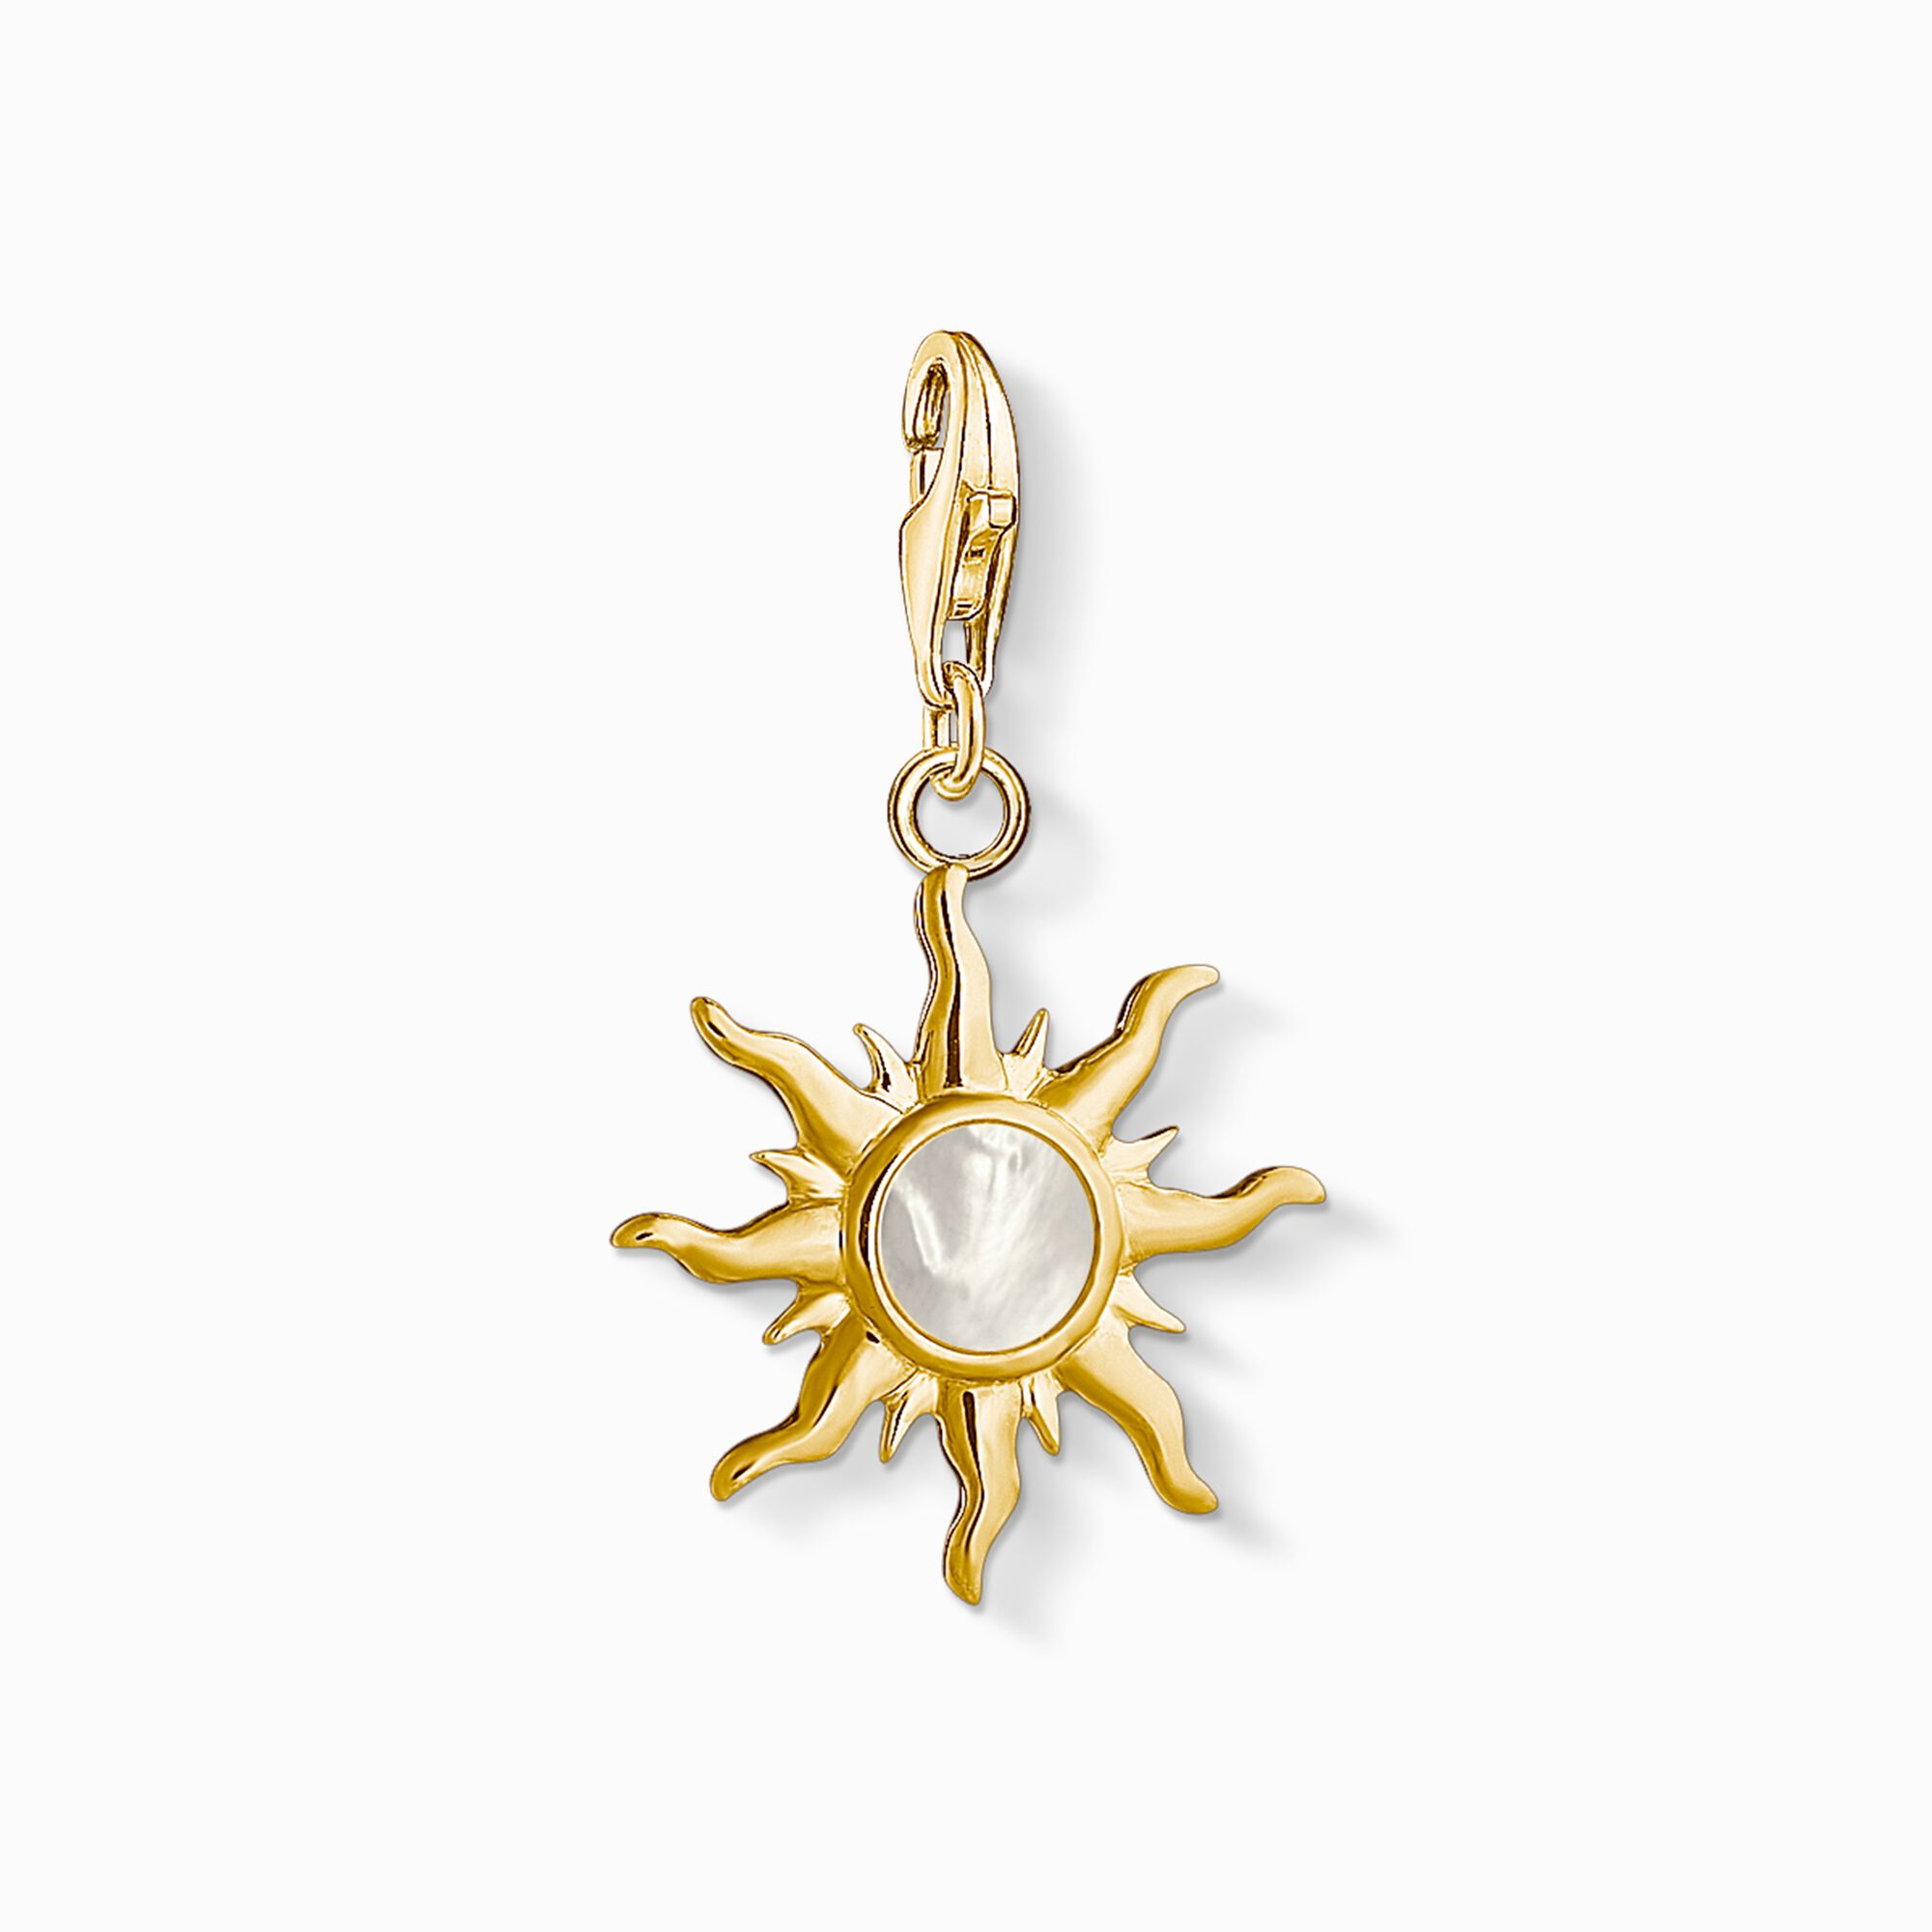 Charm pendant sun with mother-of-pearl stone from the Charm Club collection in the THOMAS SABO online store